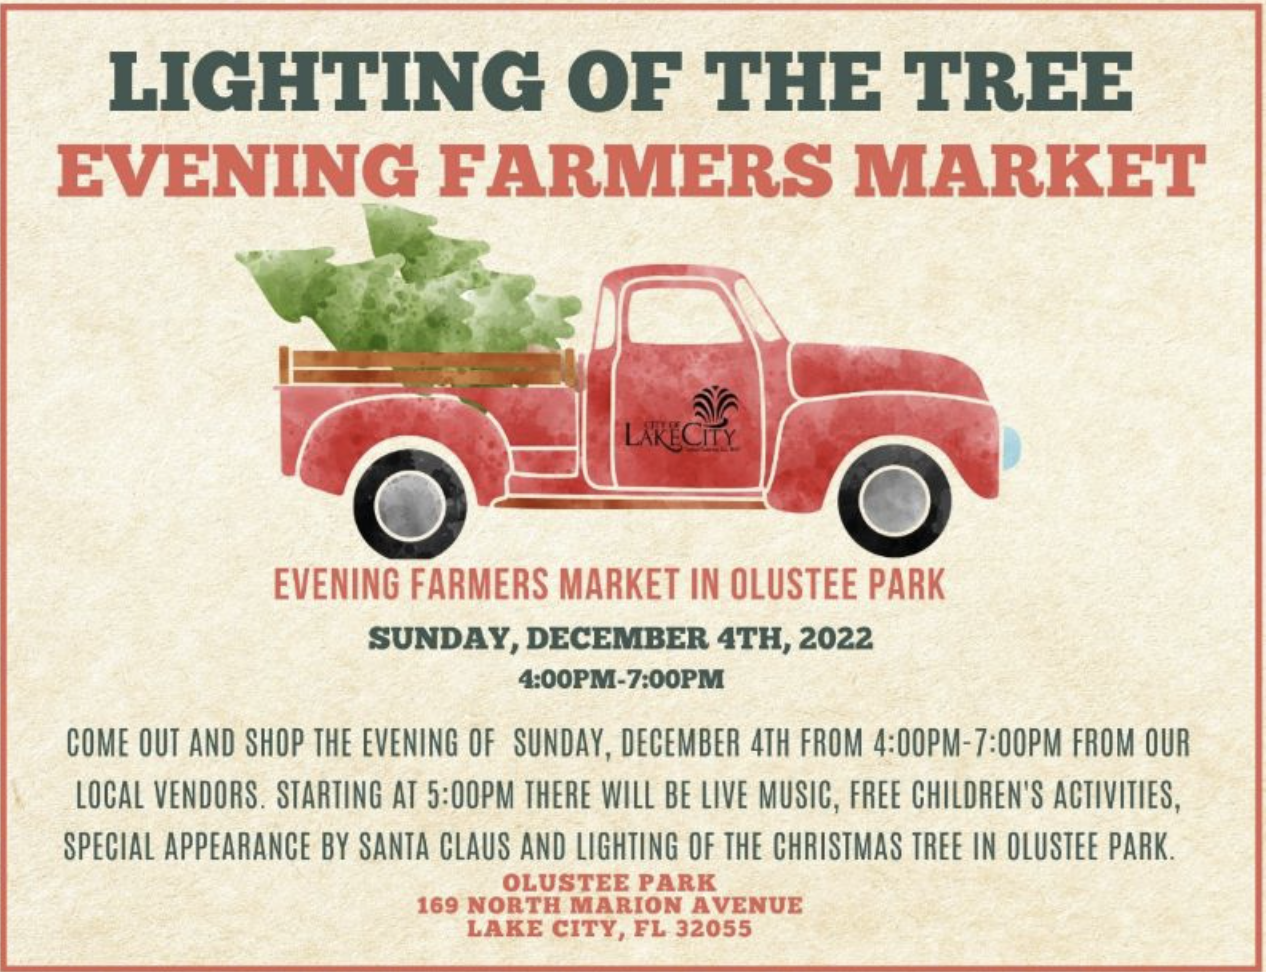 Lighting the Tree and Evening Farmers Market